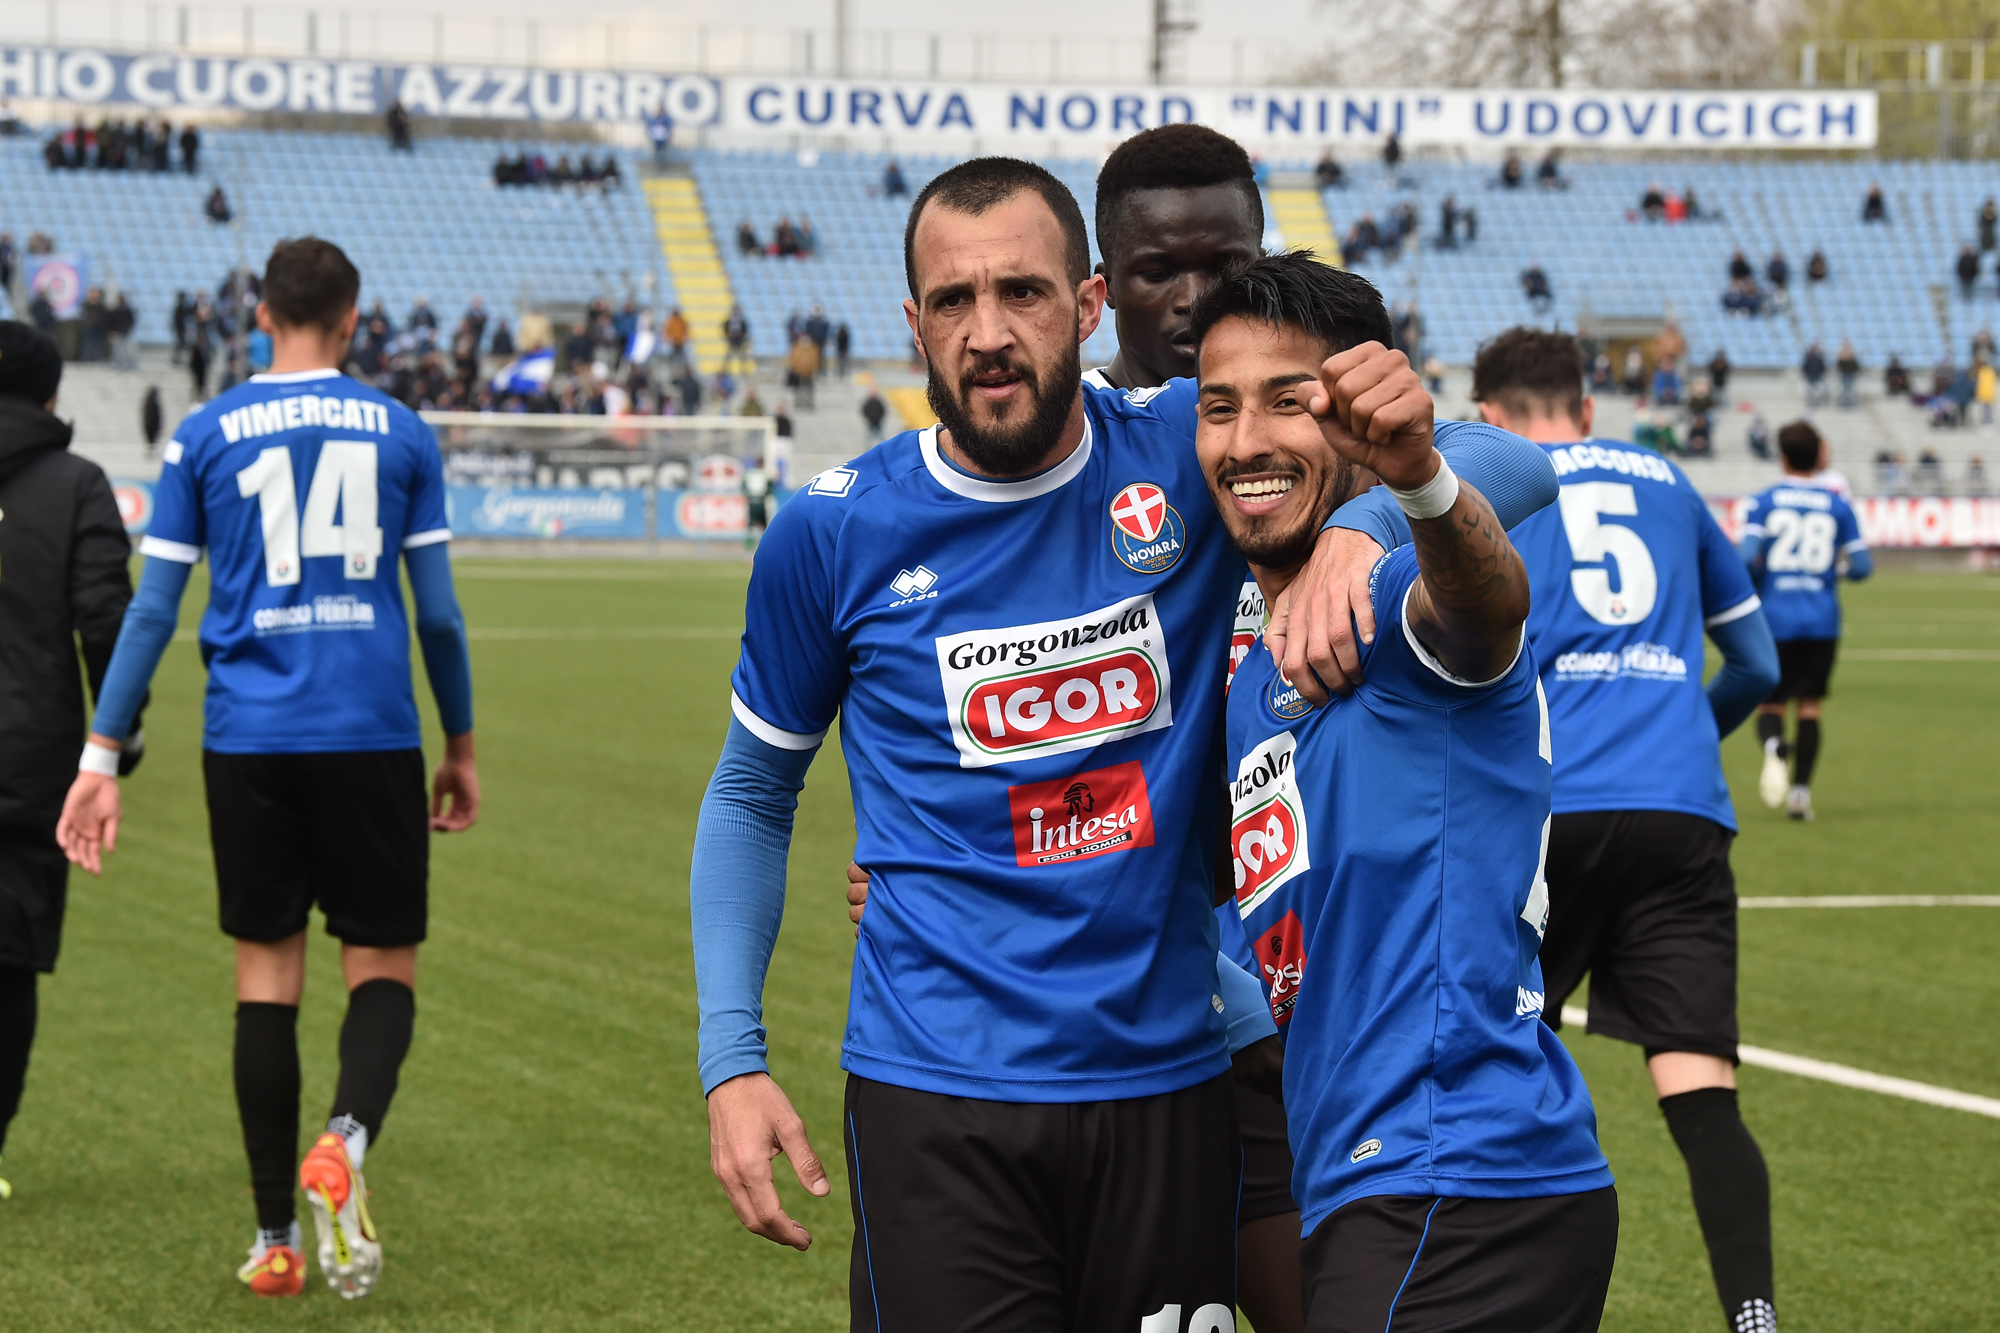 Read more about the article Novara FC vs Caronnese